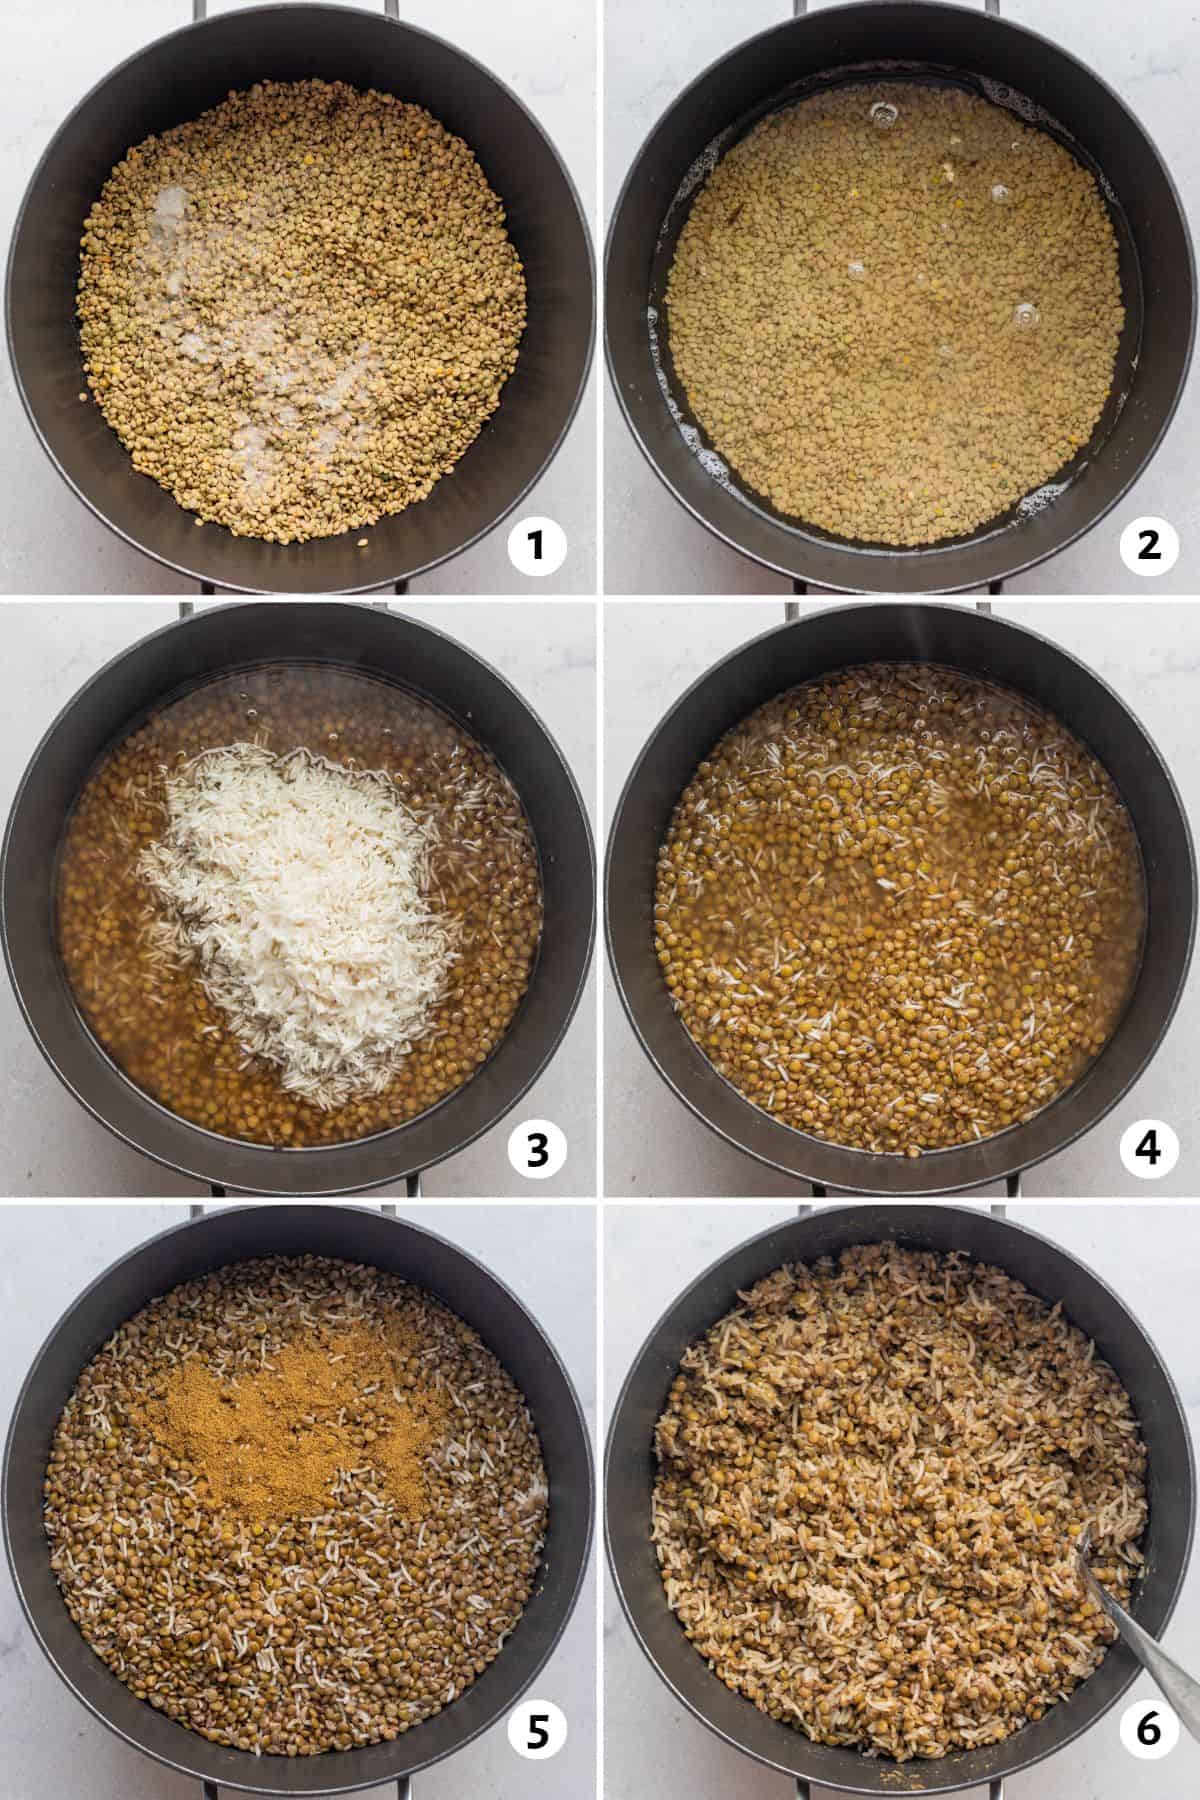 6 image collage cooking recipe in one pan: 1- lentils and salt added to pot, 2- water added, 3- soaked rice added, 4- everything combined, 5- after cooked with seasoning added, 6- mujadara after cooked.